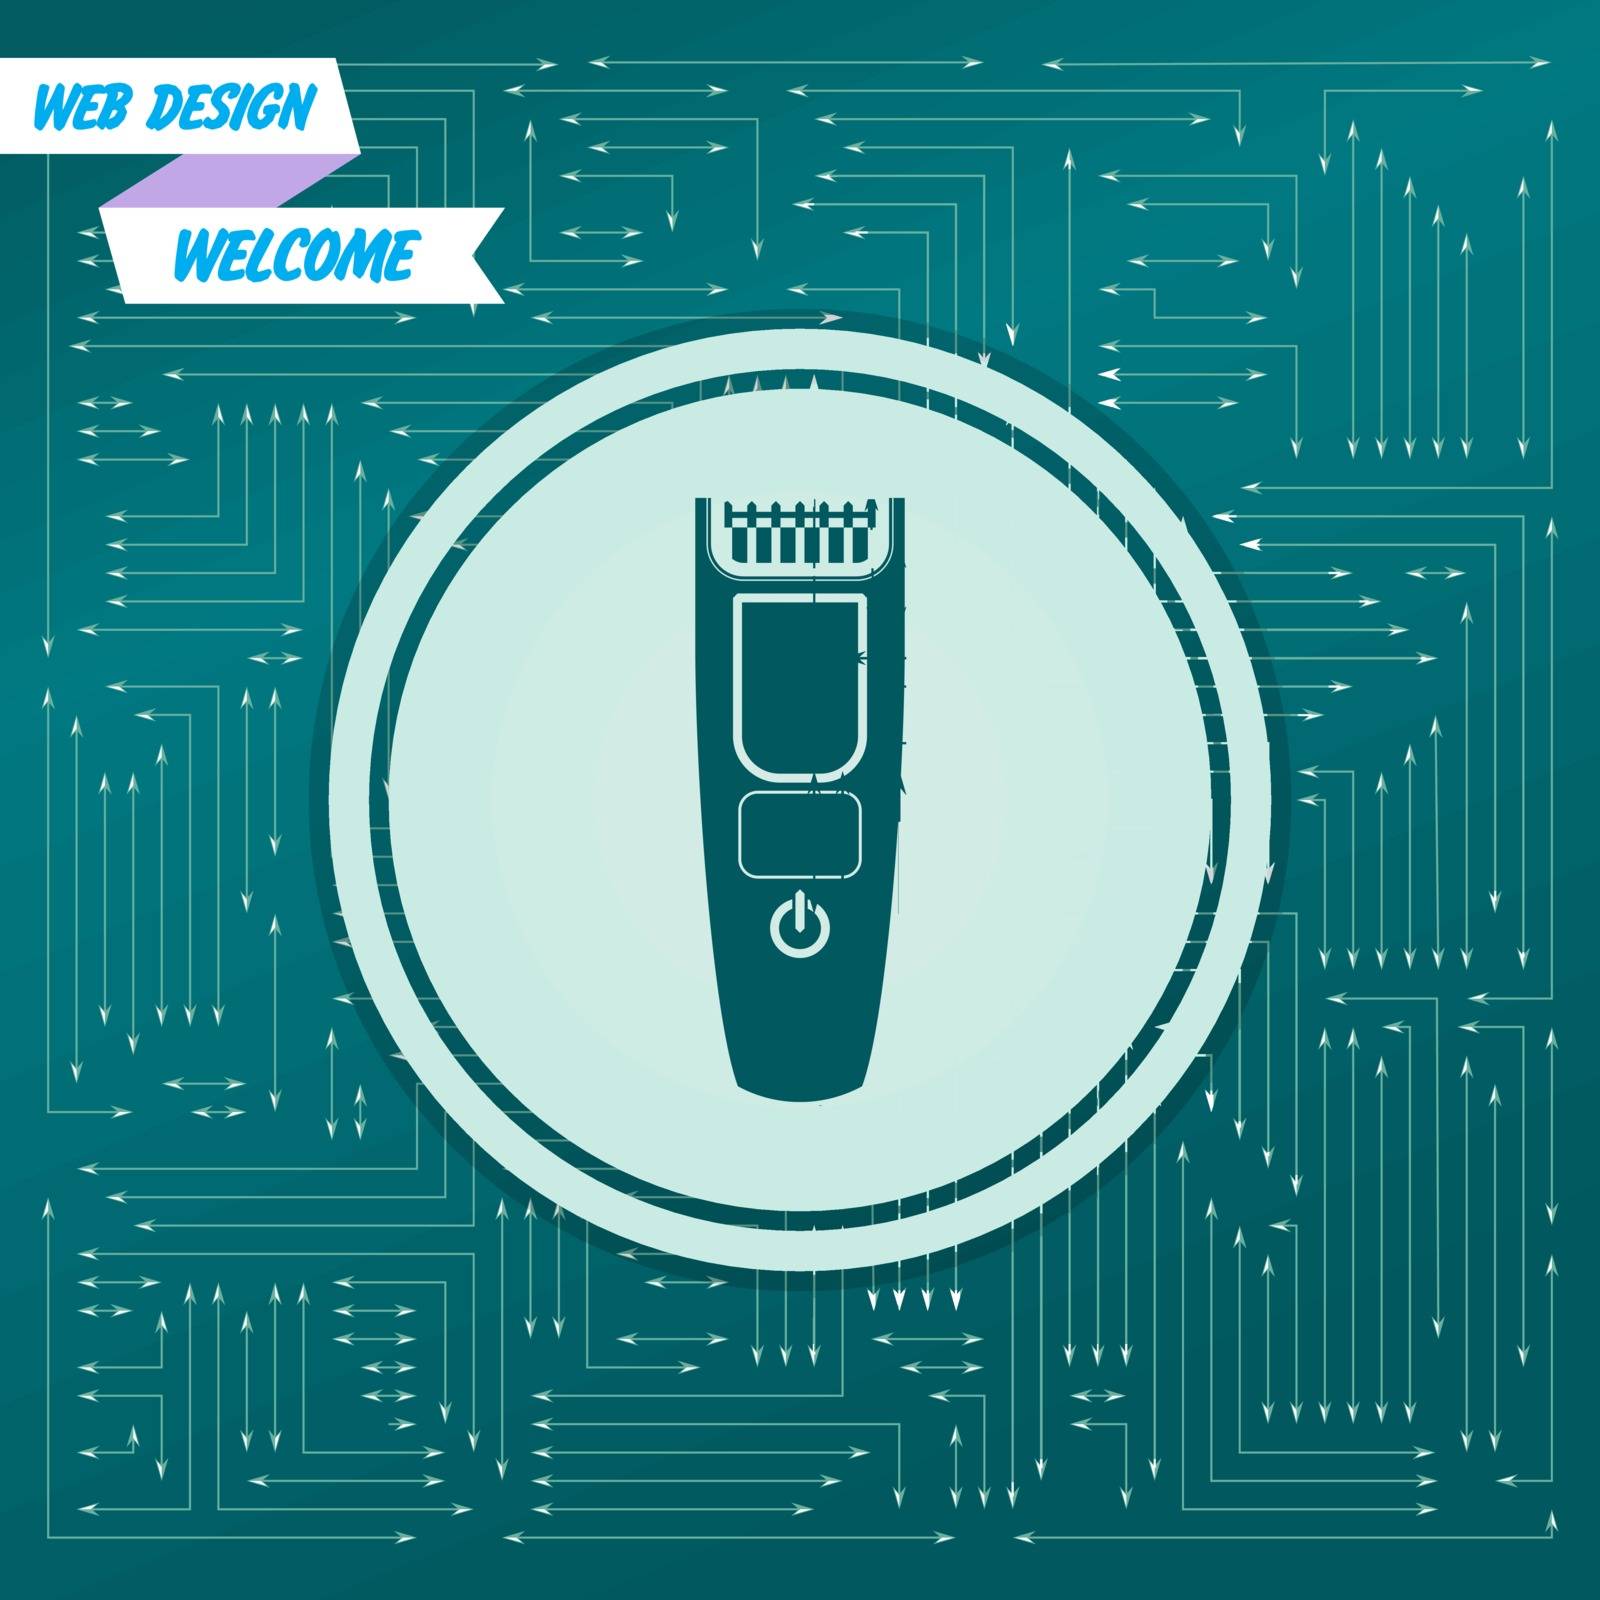 Shaver hairclipper icon on a green background, with arrows in different directions. It appears on the electronic board. Vector illustration